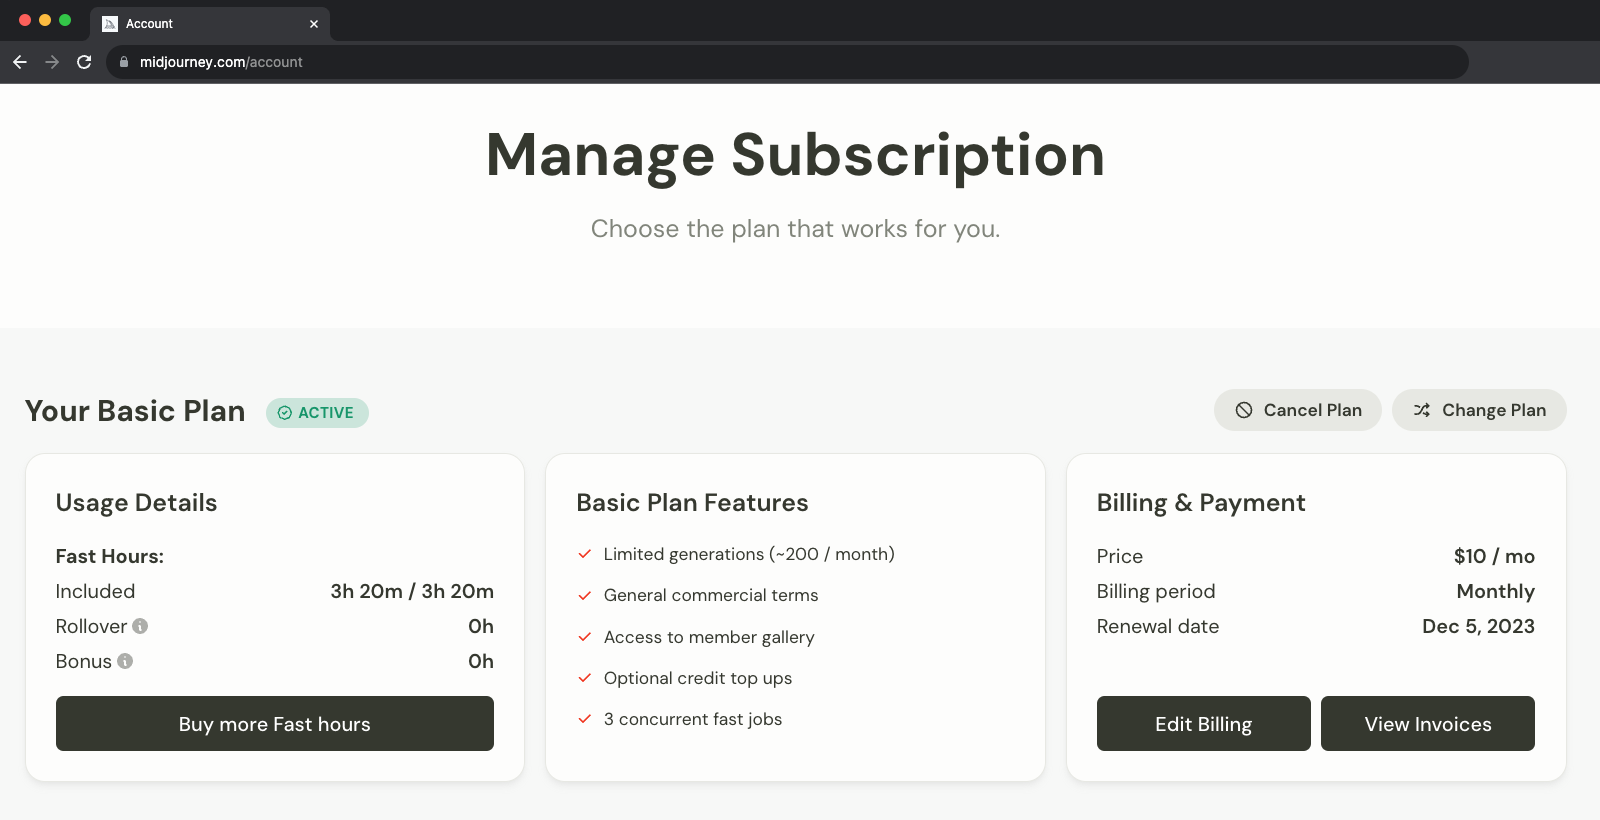 Image showing the Manage Subscription page for a Midjourney Subscriber